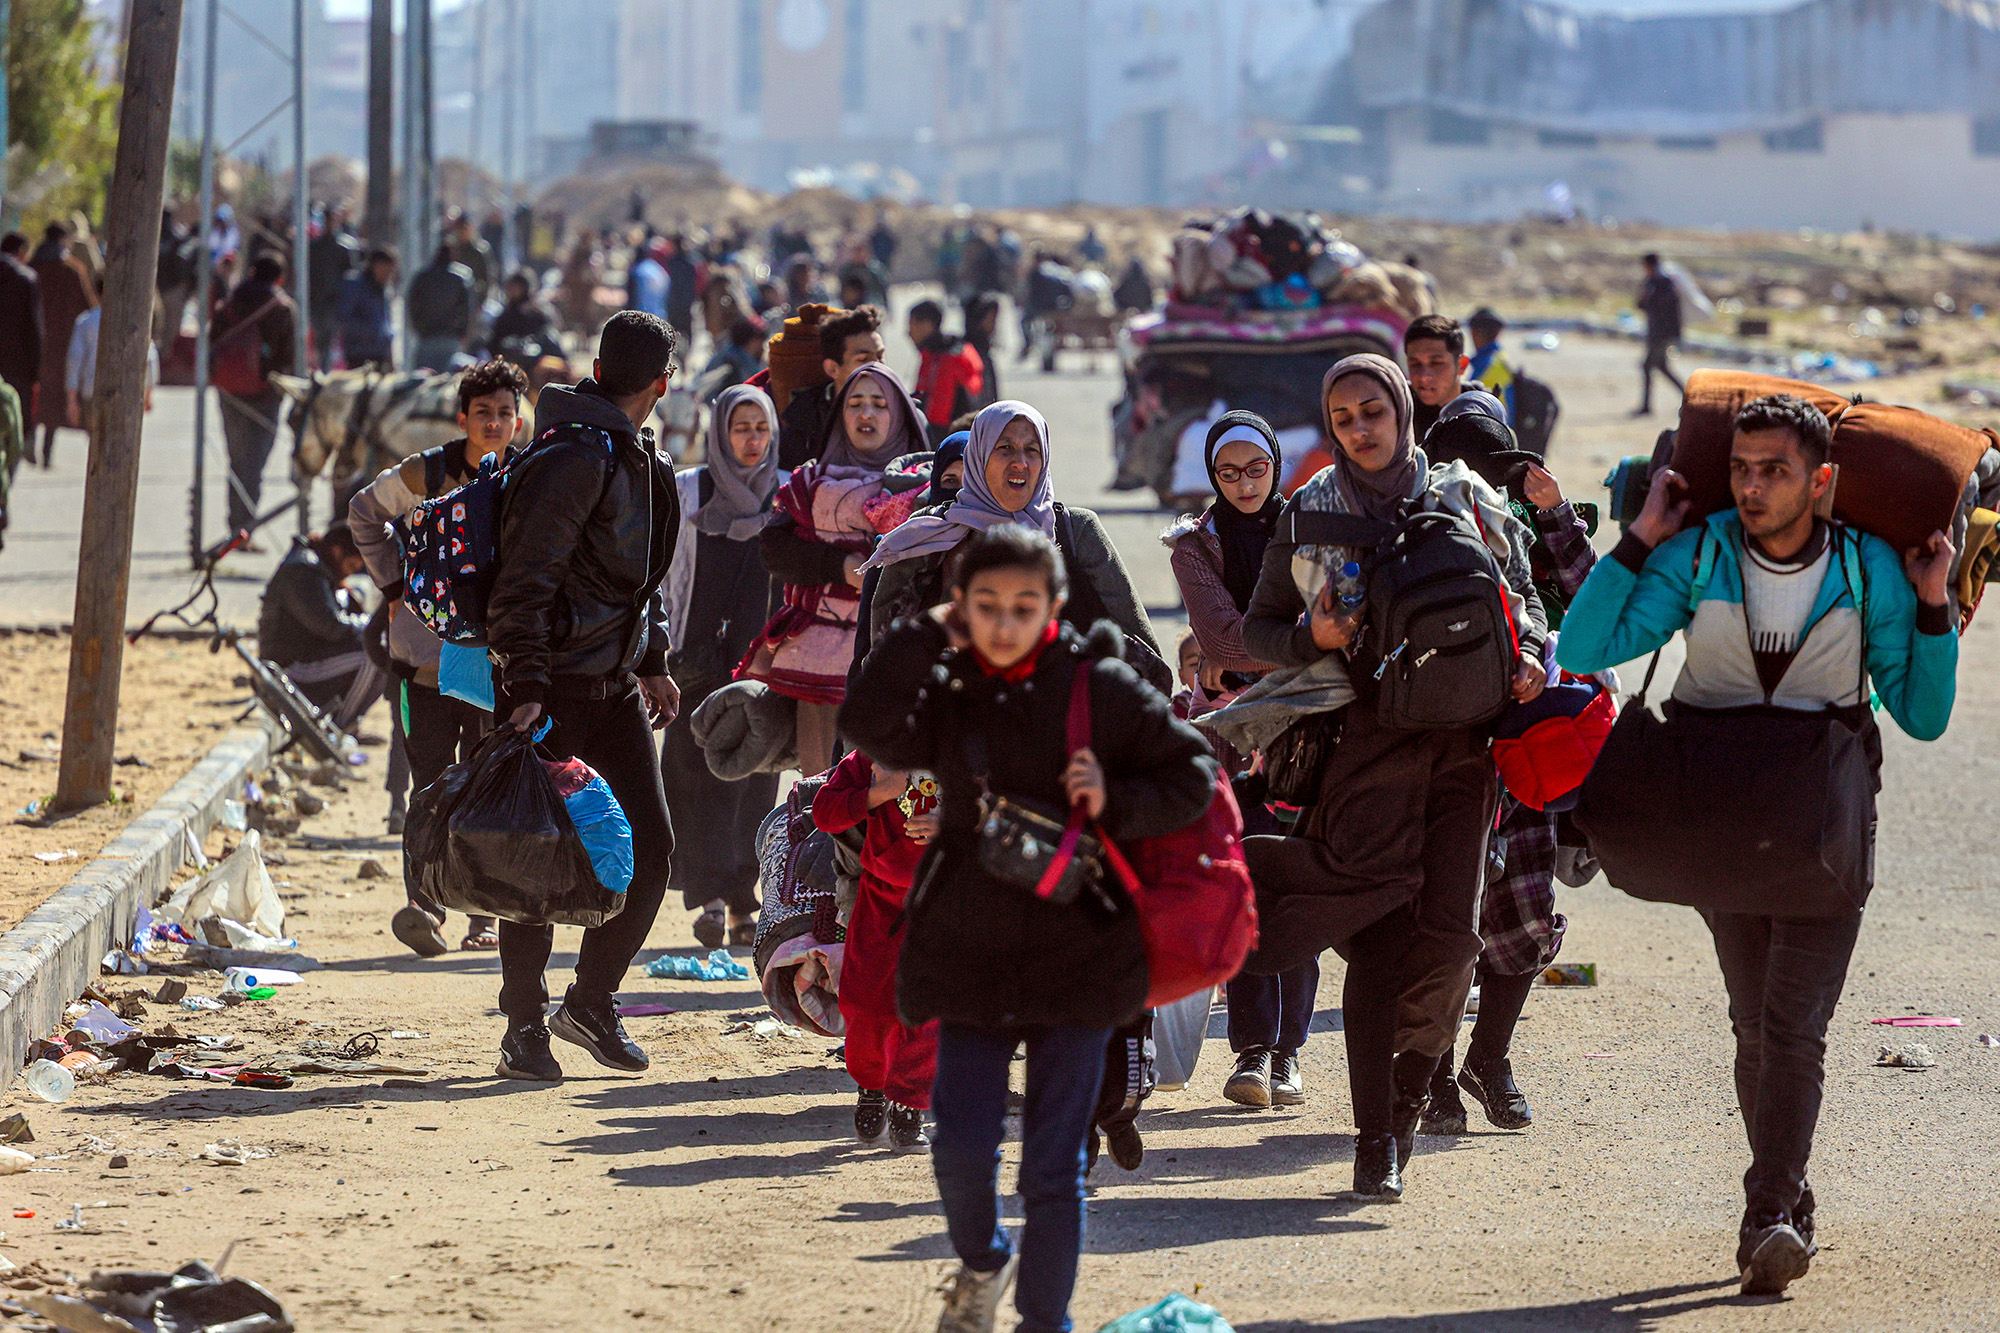 Palestinians migrate to safer areas due to Israeli attacks on Khan Younis, Gaza on January 30.